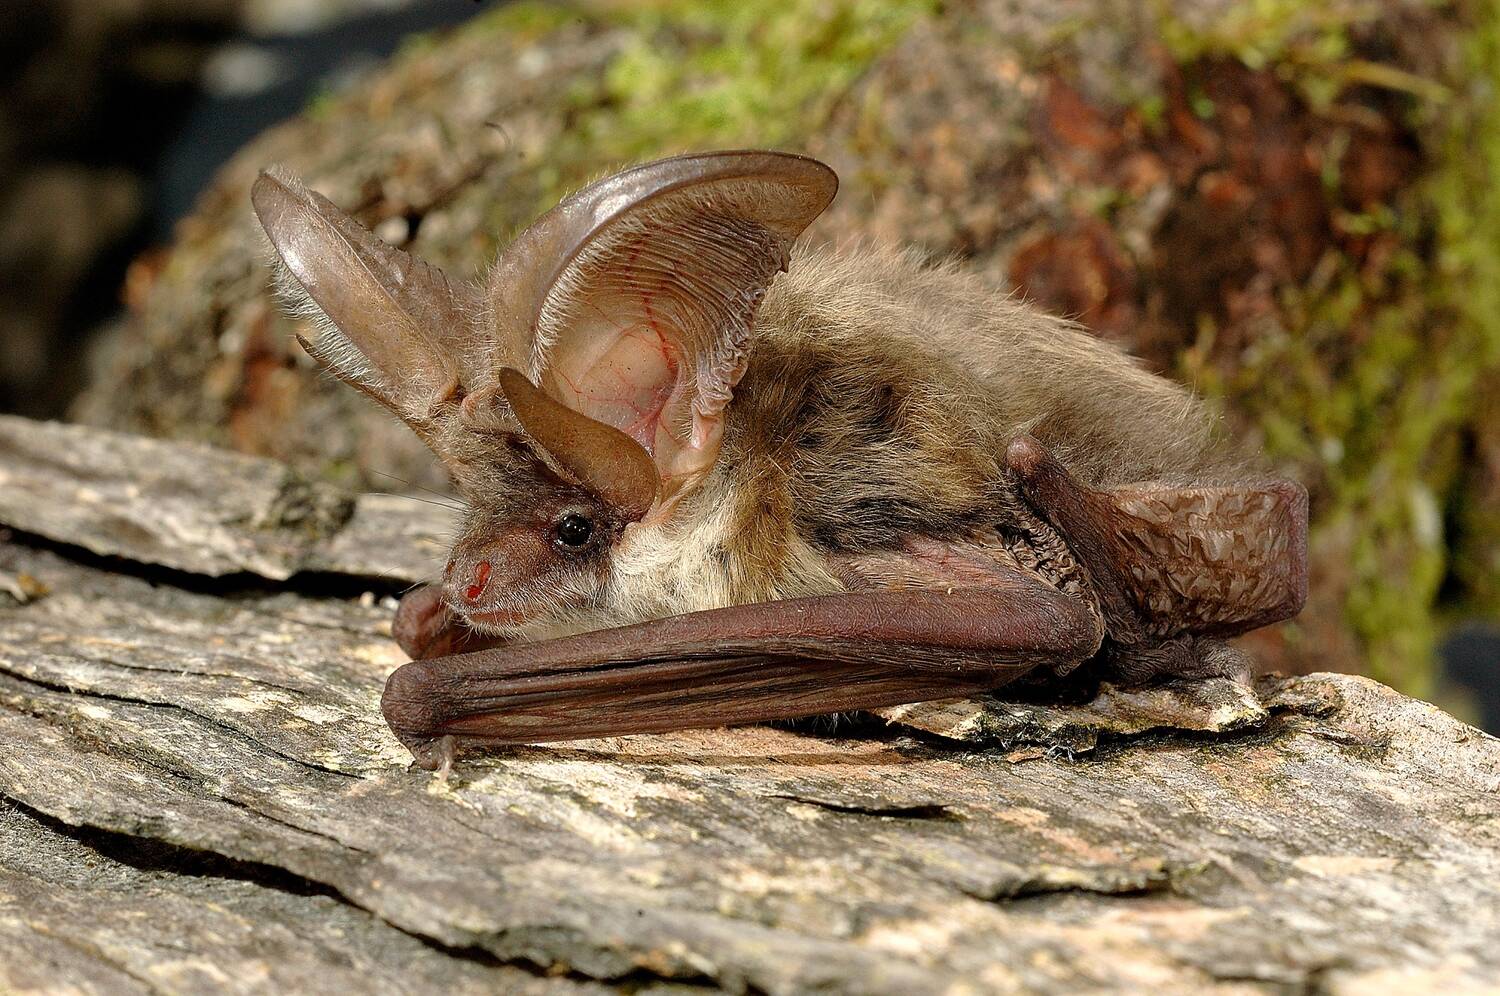 A bat rests on a rough log, with a mossy tree stump in the background. The bat has very large, almost translucent ears, with the pink veins visible. They are 'pricked up' above its head. It has a furry brown body, and its wings are folded at the sides.